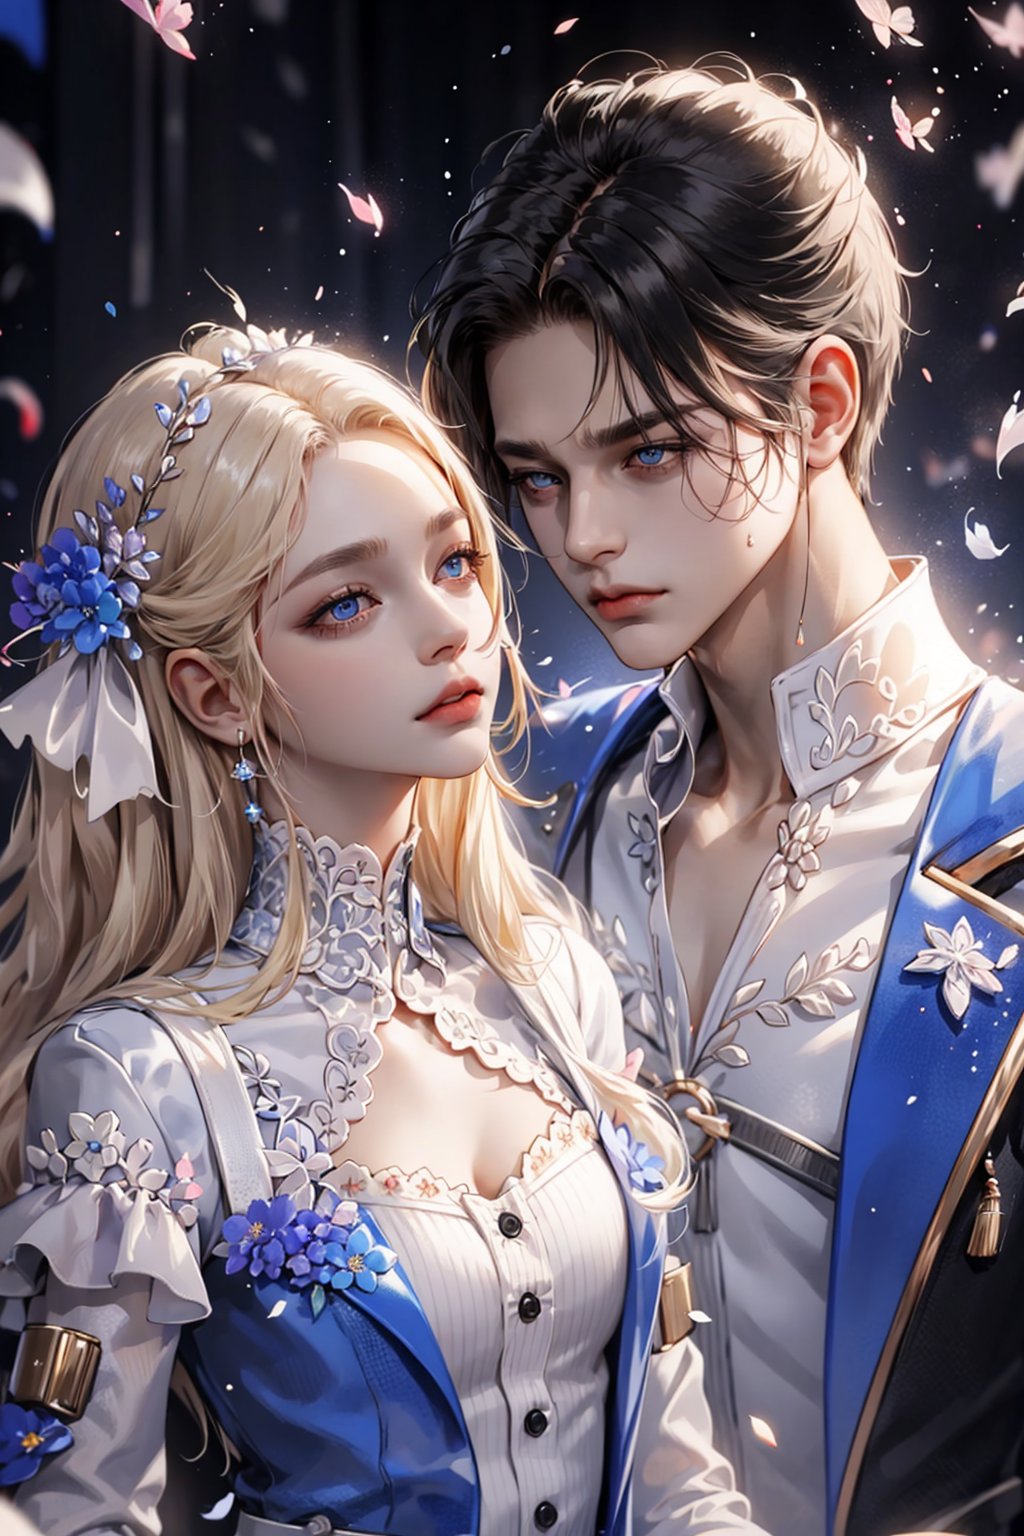 (asterpiece:1.2, best quality), (Soft light), (shiny skin), duo, kissing, 2person, couple_(romantic), man_short_black_hair, black_hair_boy, Black_hair, hateful look, 1man, 1girl, eye_lashes, collarbone, victorian, blue eyes, blonde_long_ hair_girl, black_short_hair_man, royalty background, sexual, flowers petals, french_kiss